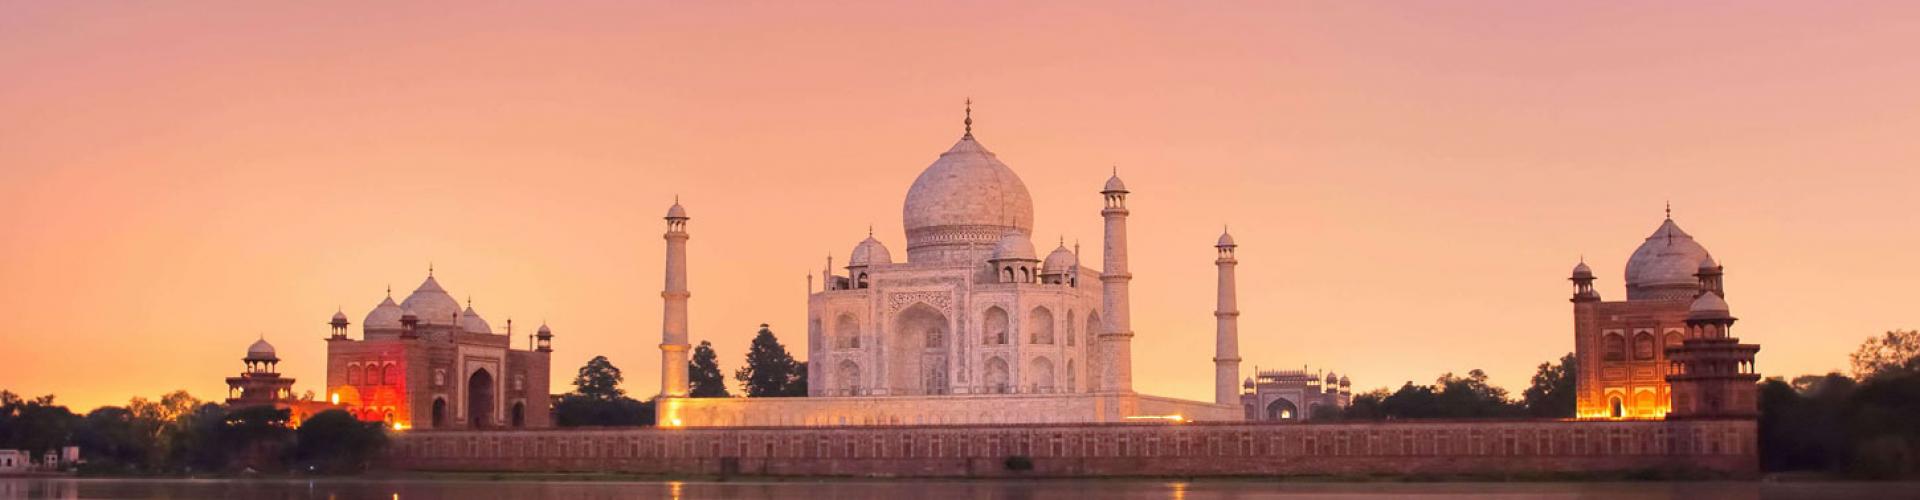 india tour packages from toronto